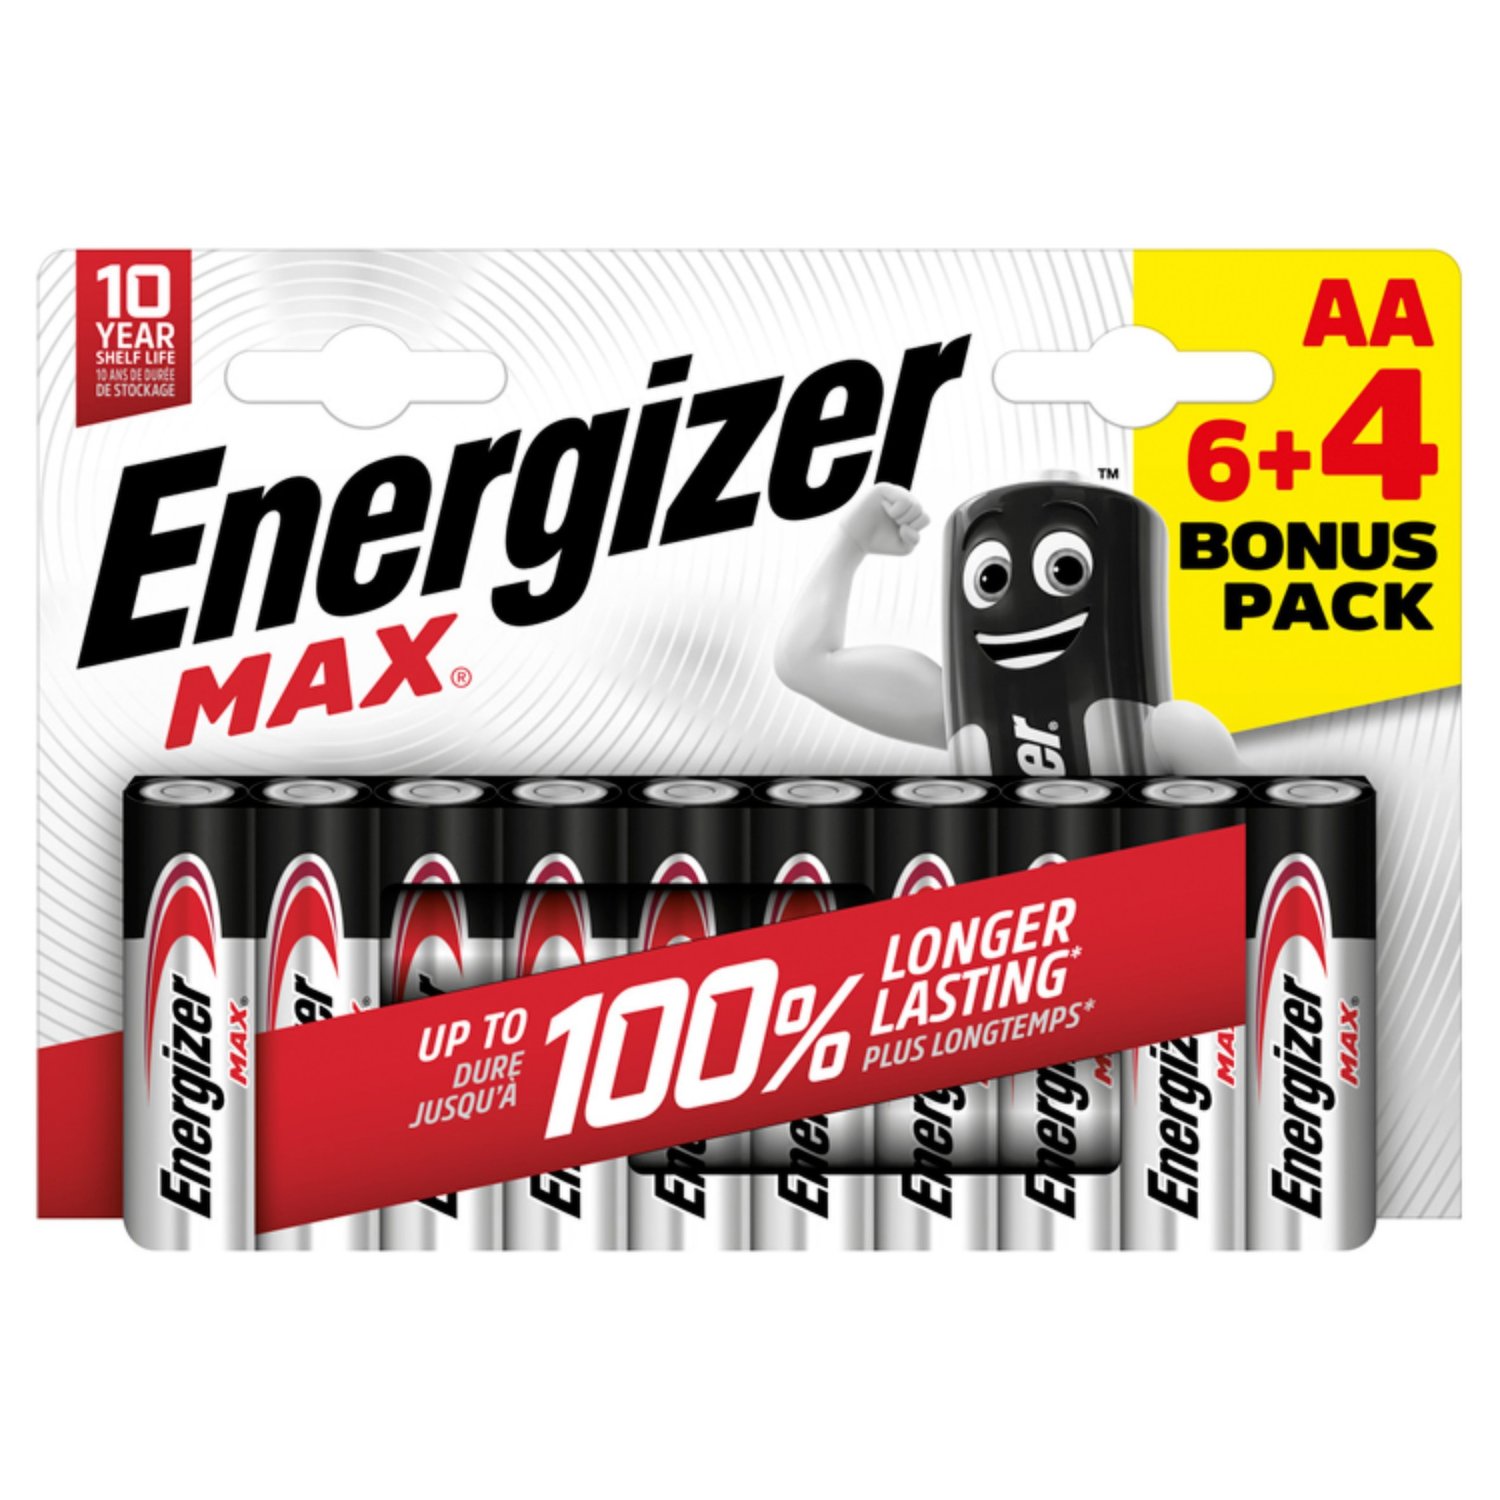 Pile Energizer Max - AA, AAA, C, D & 9V French